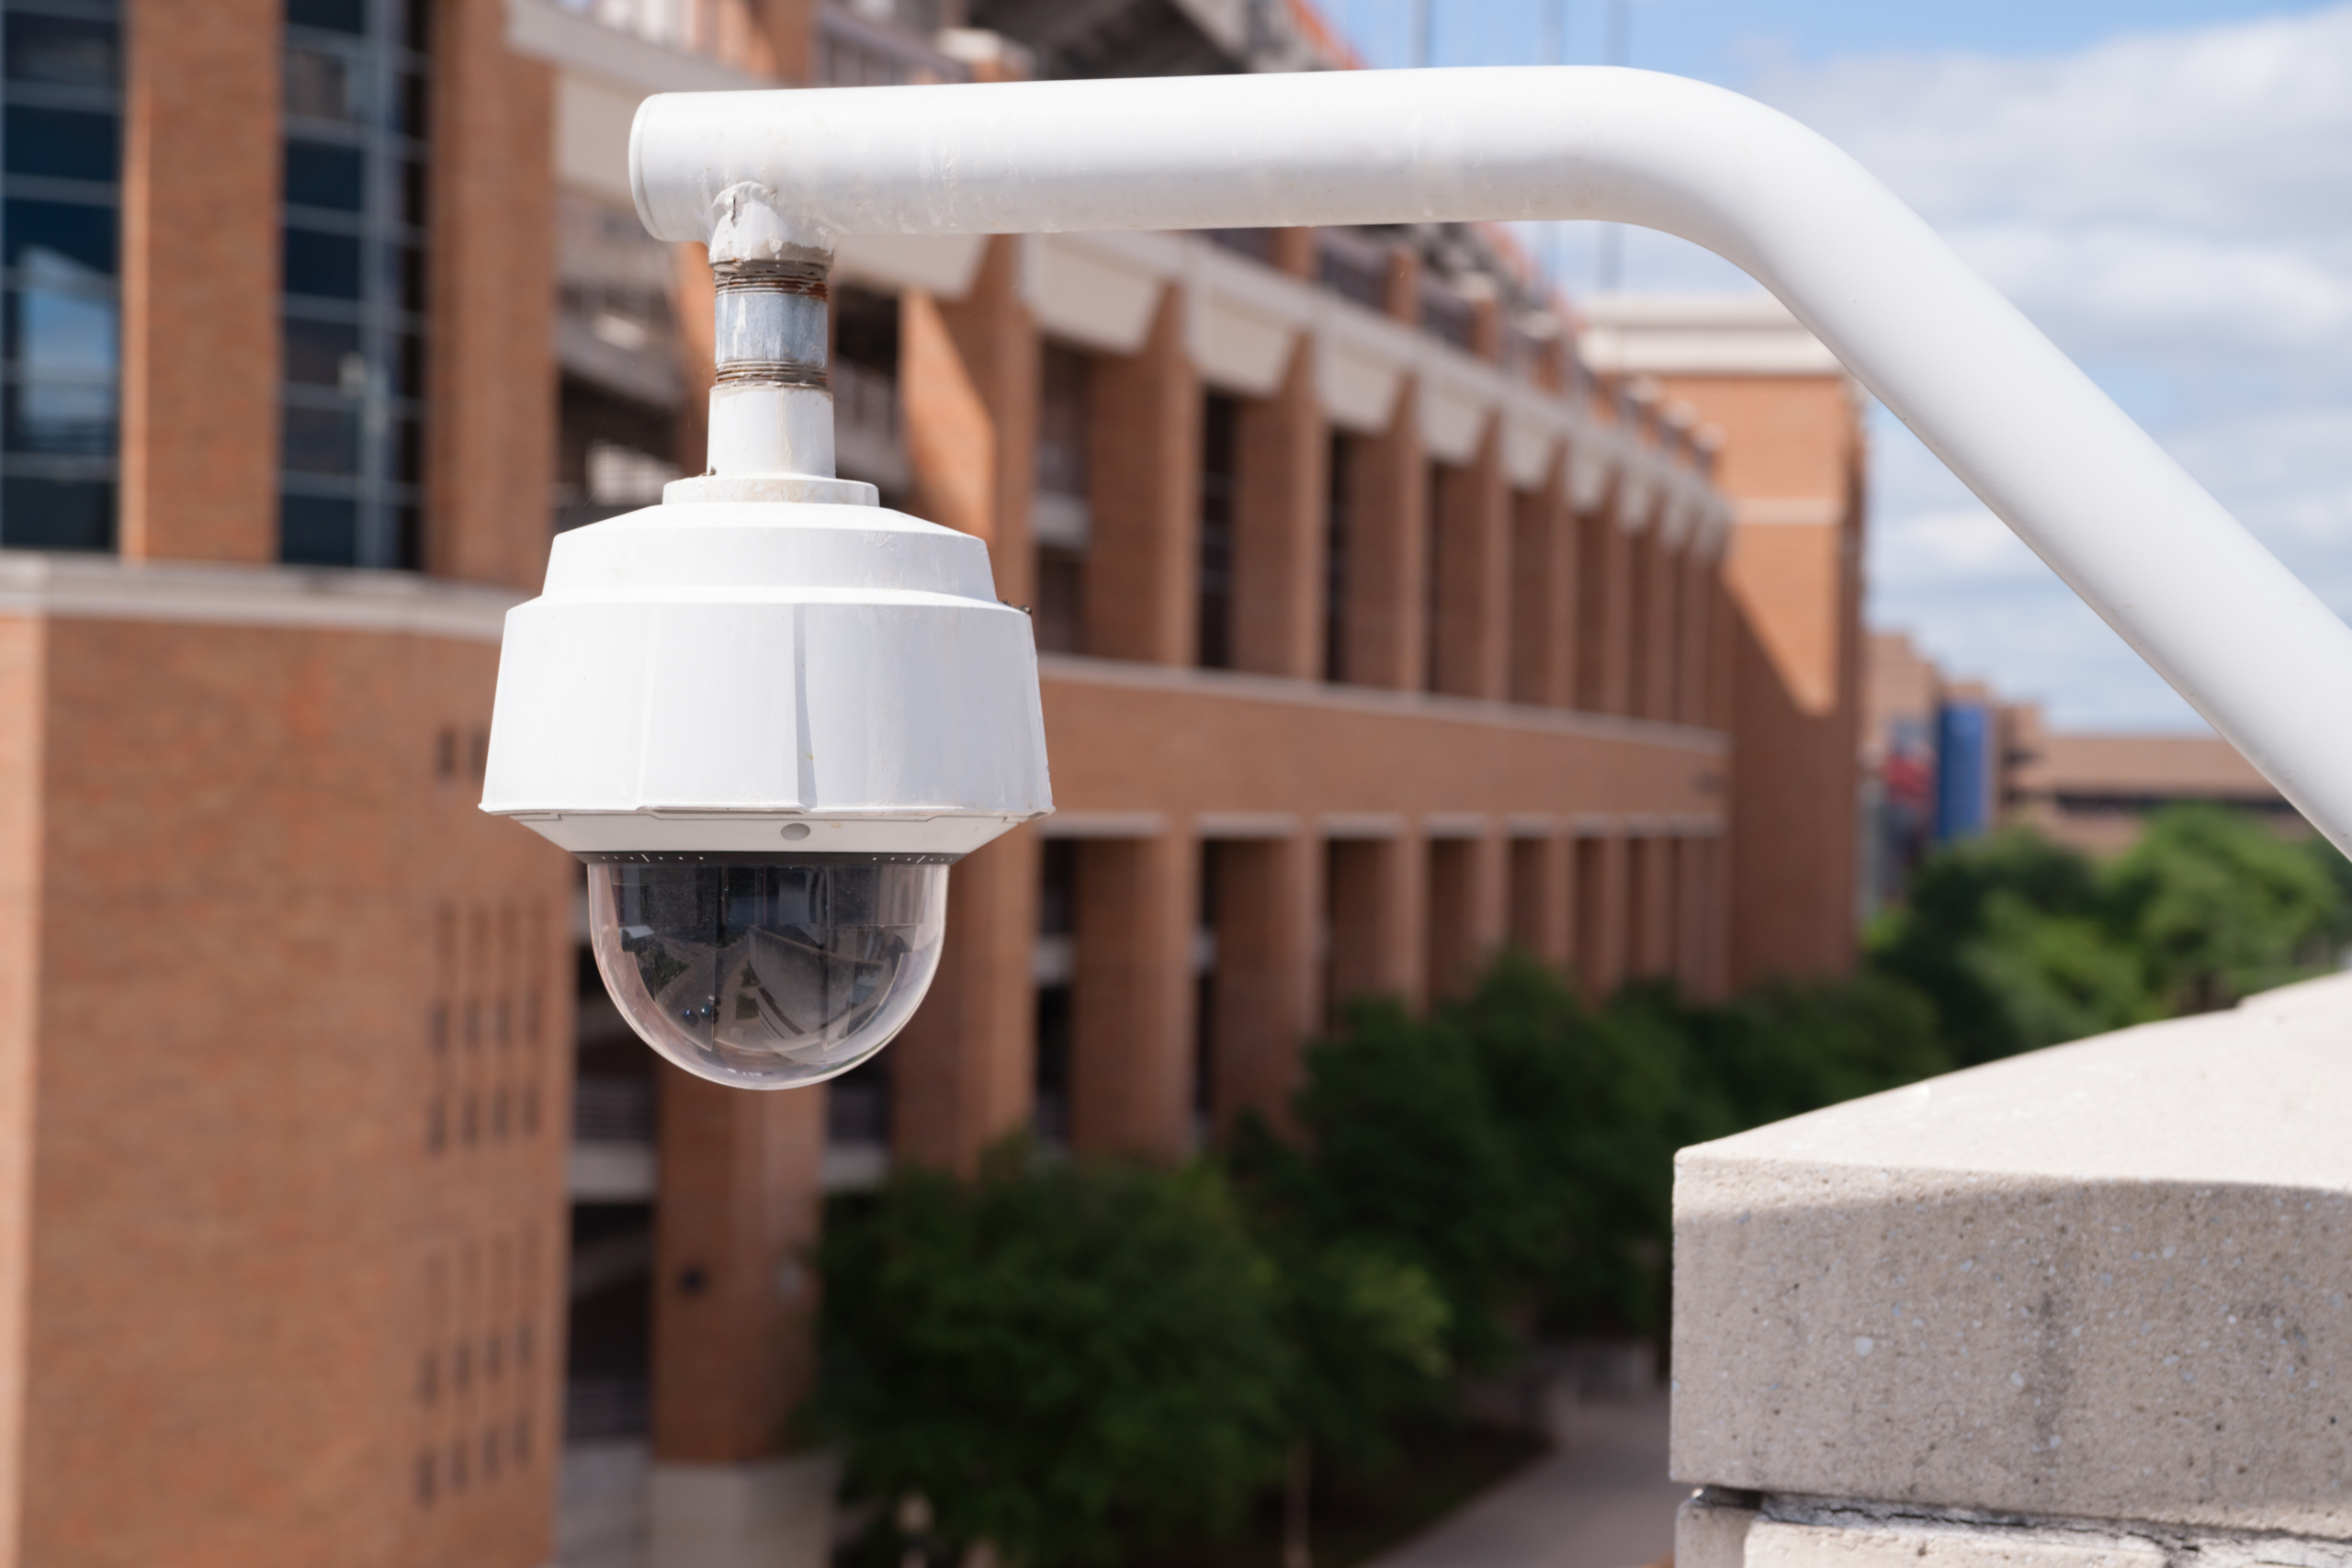 outdoor security camera at college